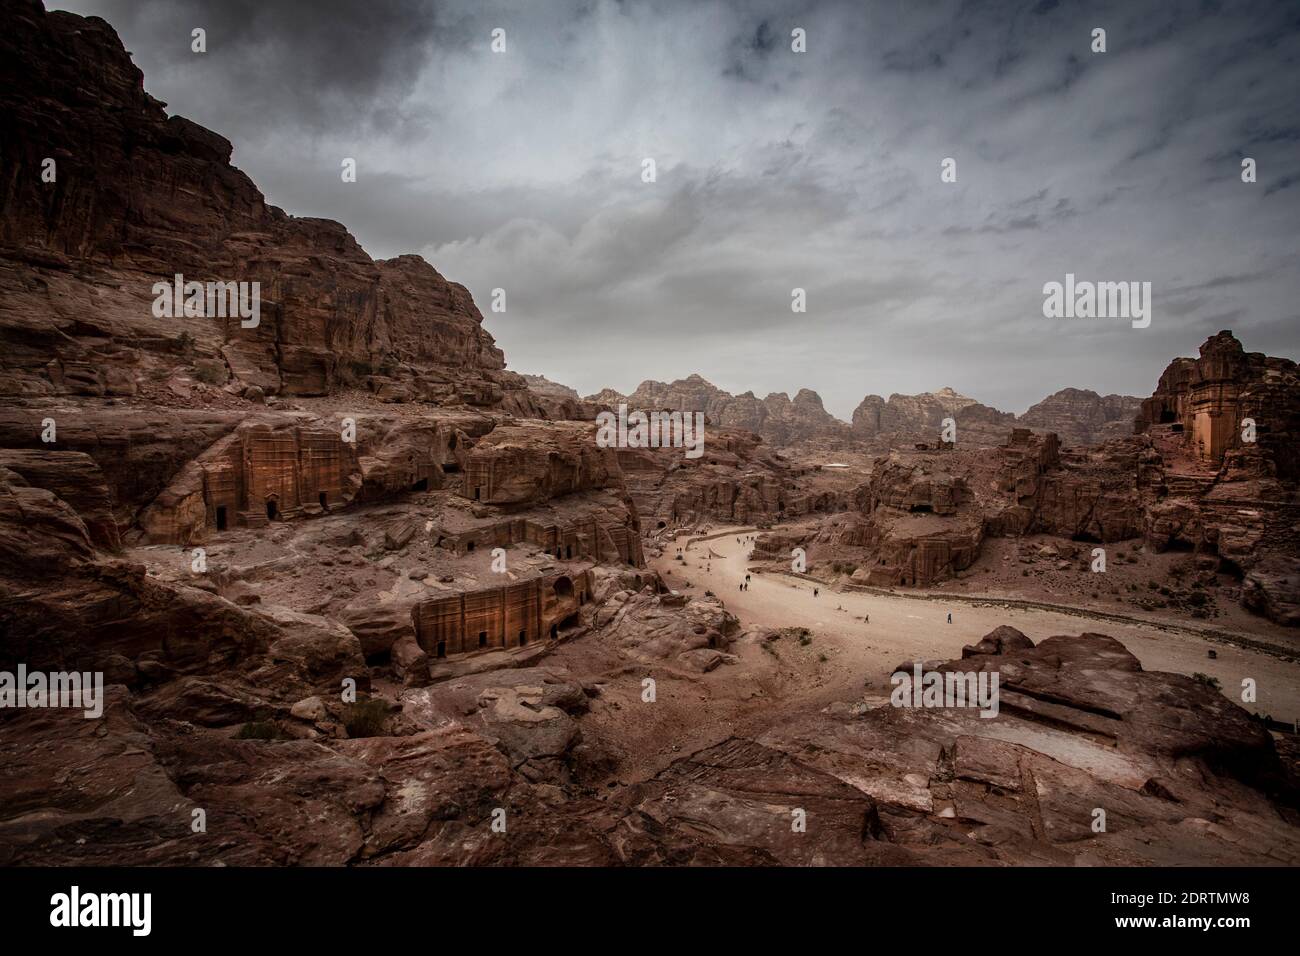 Wadi Musa, Petra archeological site, just a few weeks  before the global lockdown due to the pandemic Stock Photo